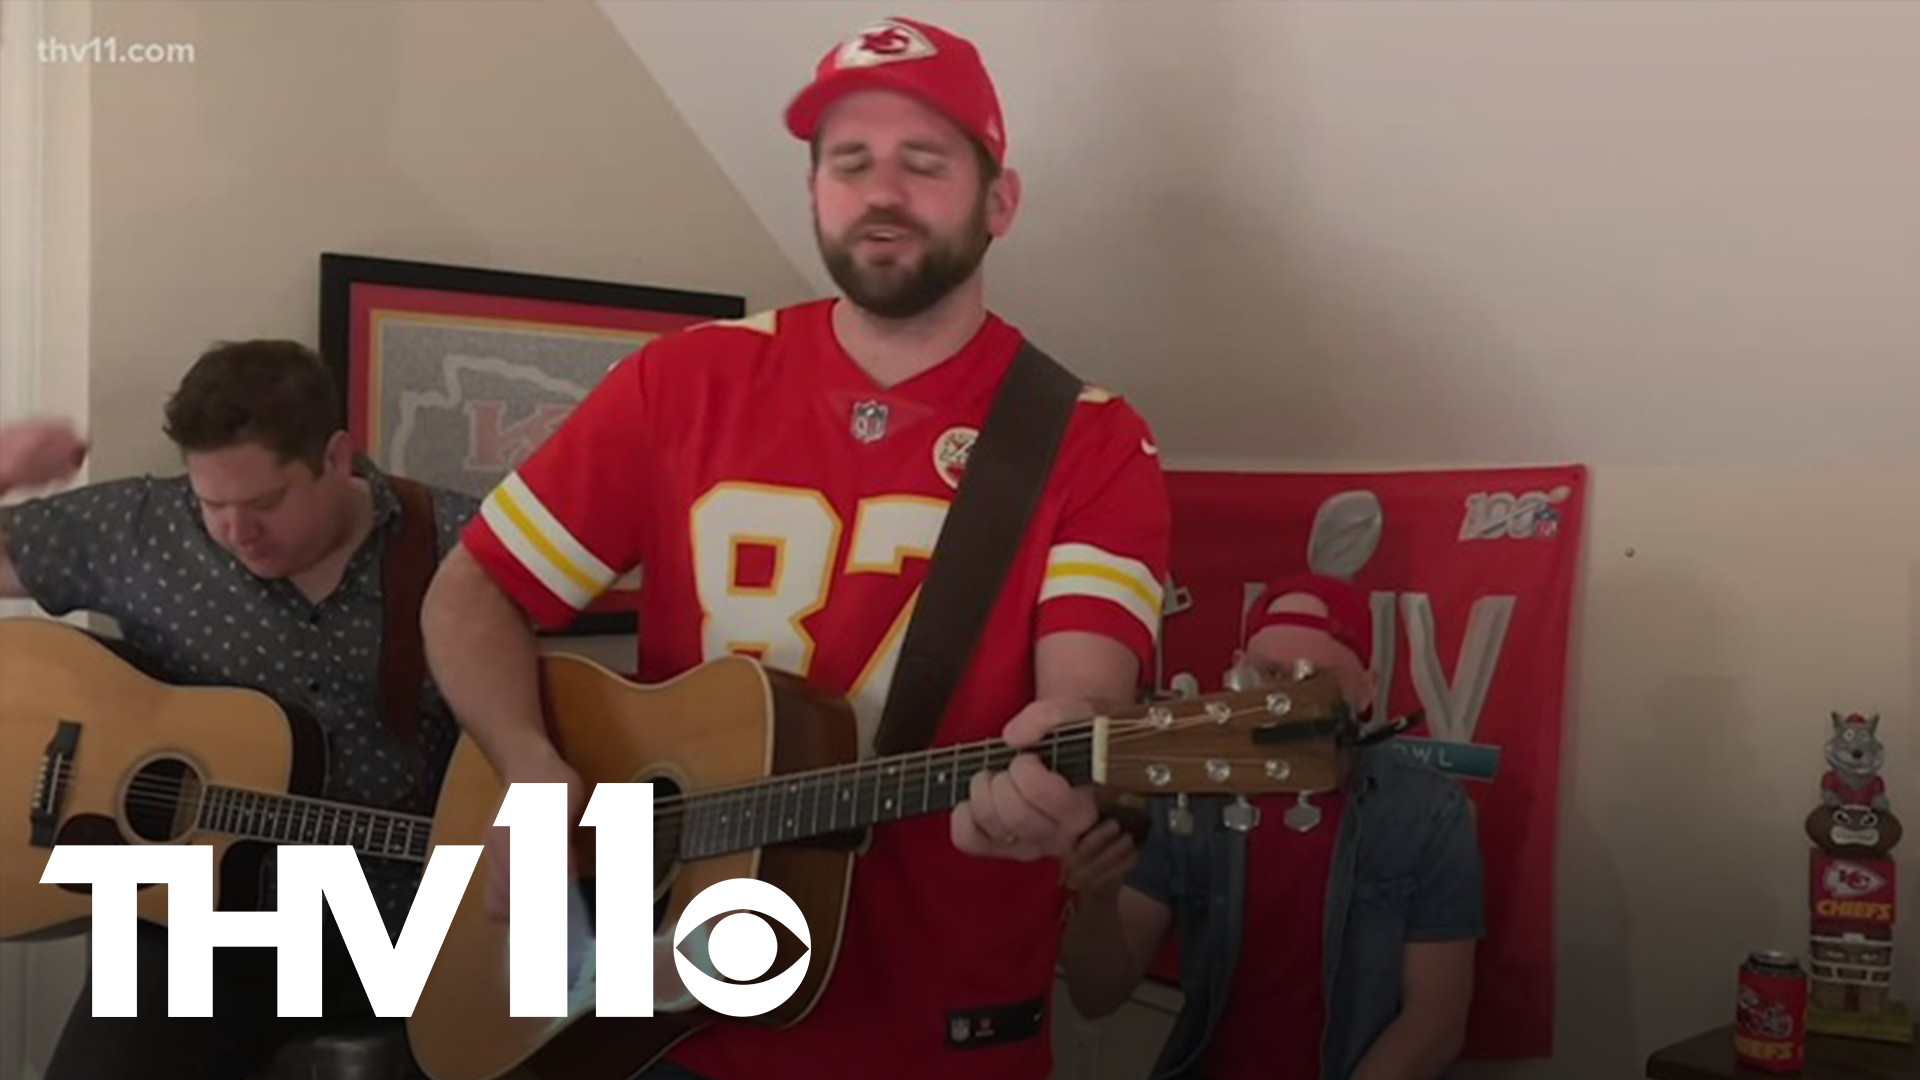 Blane Howard's viral song "Run it Back" has millions of streams and has even been been played inside Arrowhead Stadium.